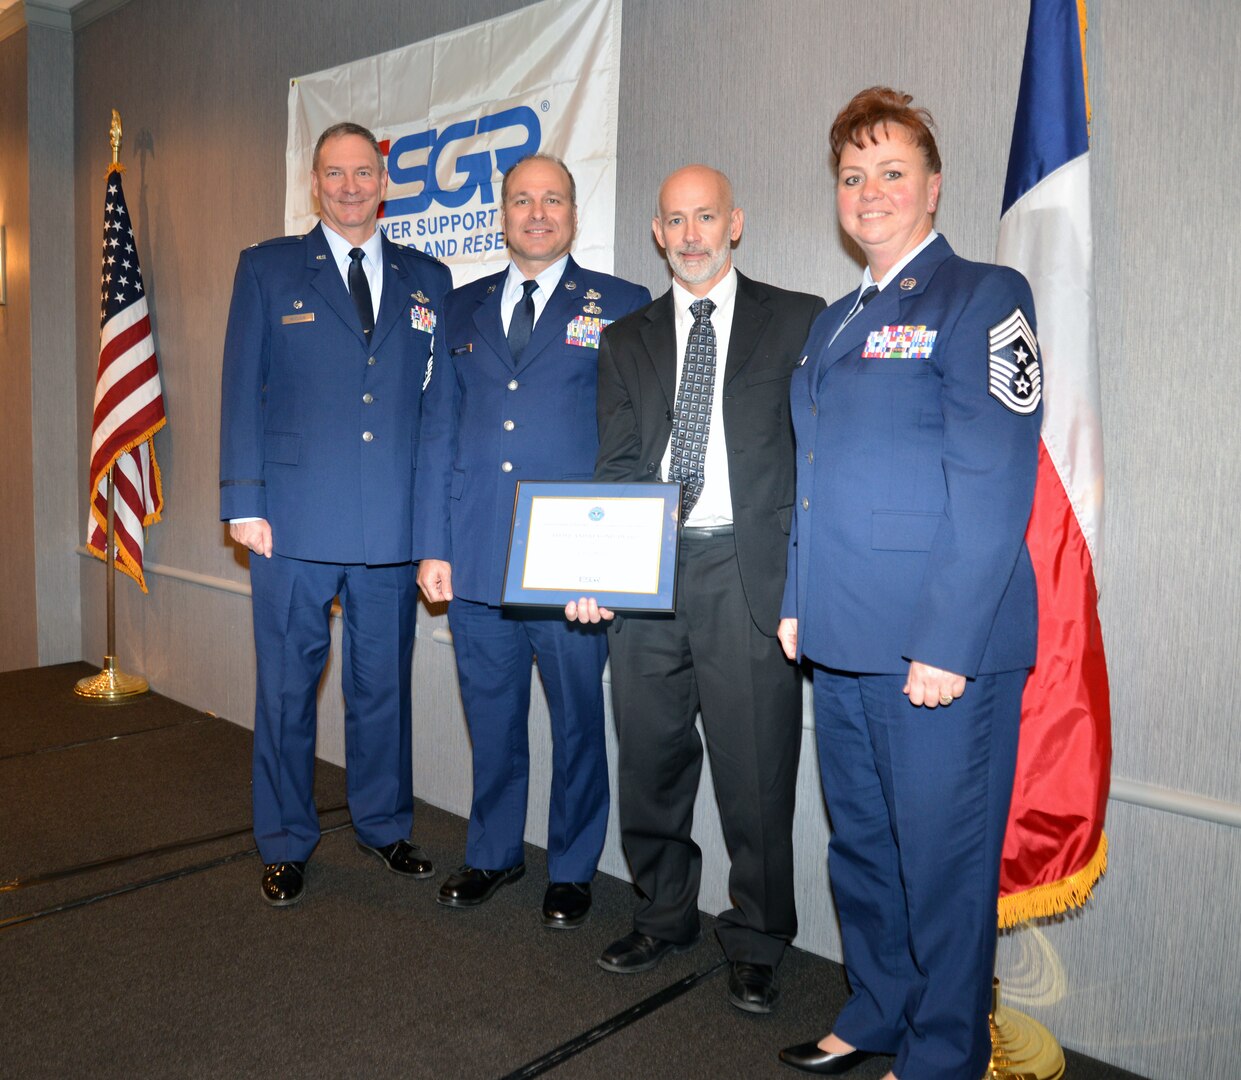 Col. Terry W. McClain, 433rd Airlift Wing commander; Chief Master Sgt. Andrew Branning, 433rd AW administration functional manager; Mark Middleton, CloudWave VIP of cloud services; and Chief Master Sgt. Shana C. Cullum, 433rd AW command chief, pause for a moment following the ESGR Salute to Employers Awards luncheon Nov. 13, 2019 in San Antonio.